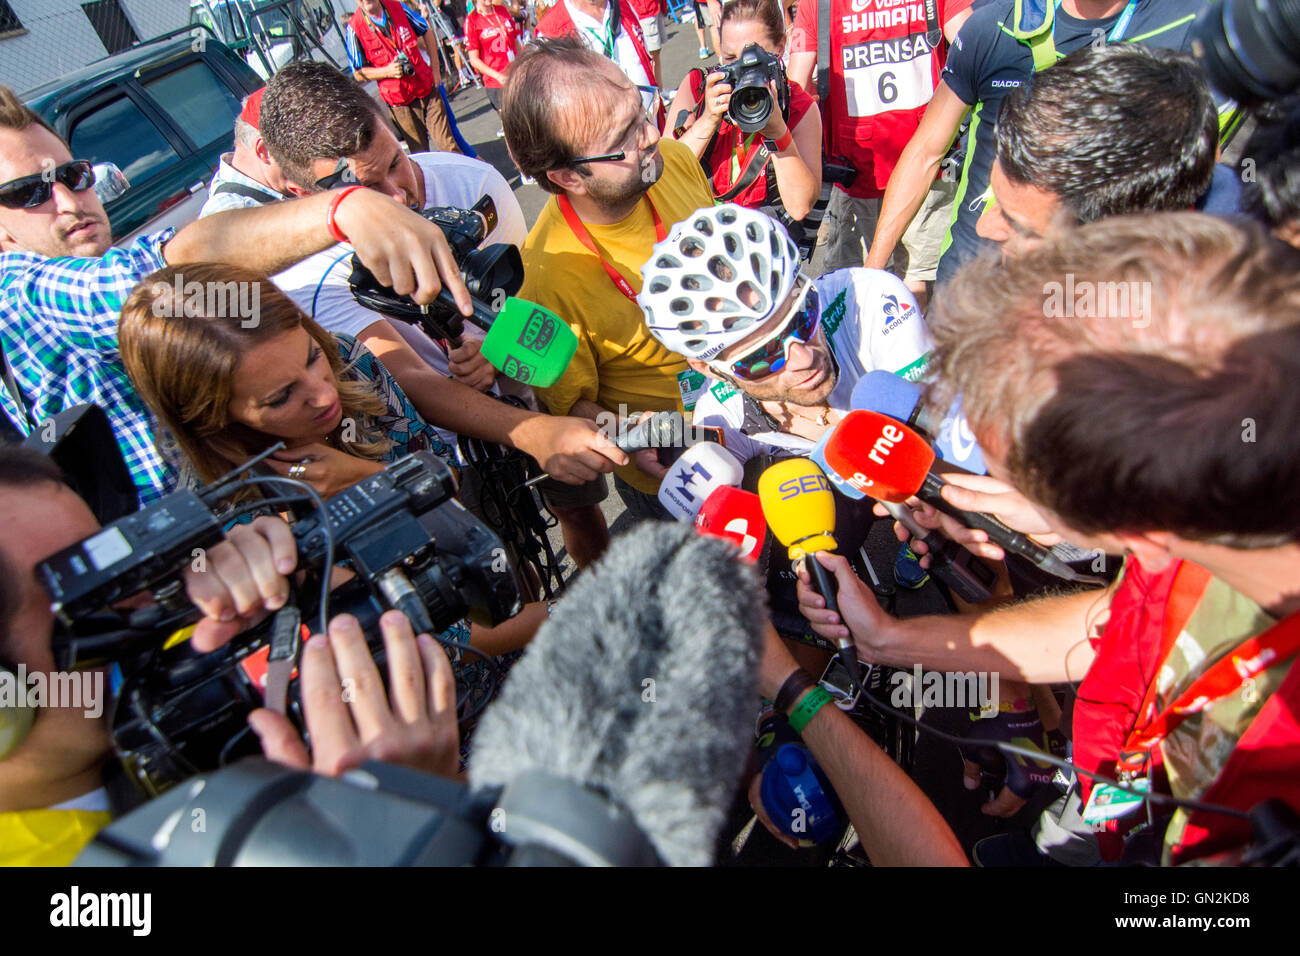 La Camperona, Spain. 27th August, 2016. Alejandro Valverde (Movistar Team) during press conference after finish the 8th stage of cycling race ‘La Vuelta a España’ (Tour of Spain) between Villalpando and Climb of La Camperona on August 27, 2016 in Leon, Spain. Credit: David Gato/Alamy Live News Stock Photo